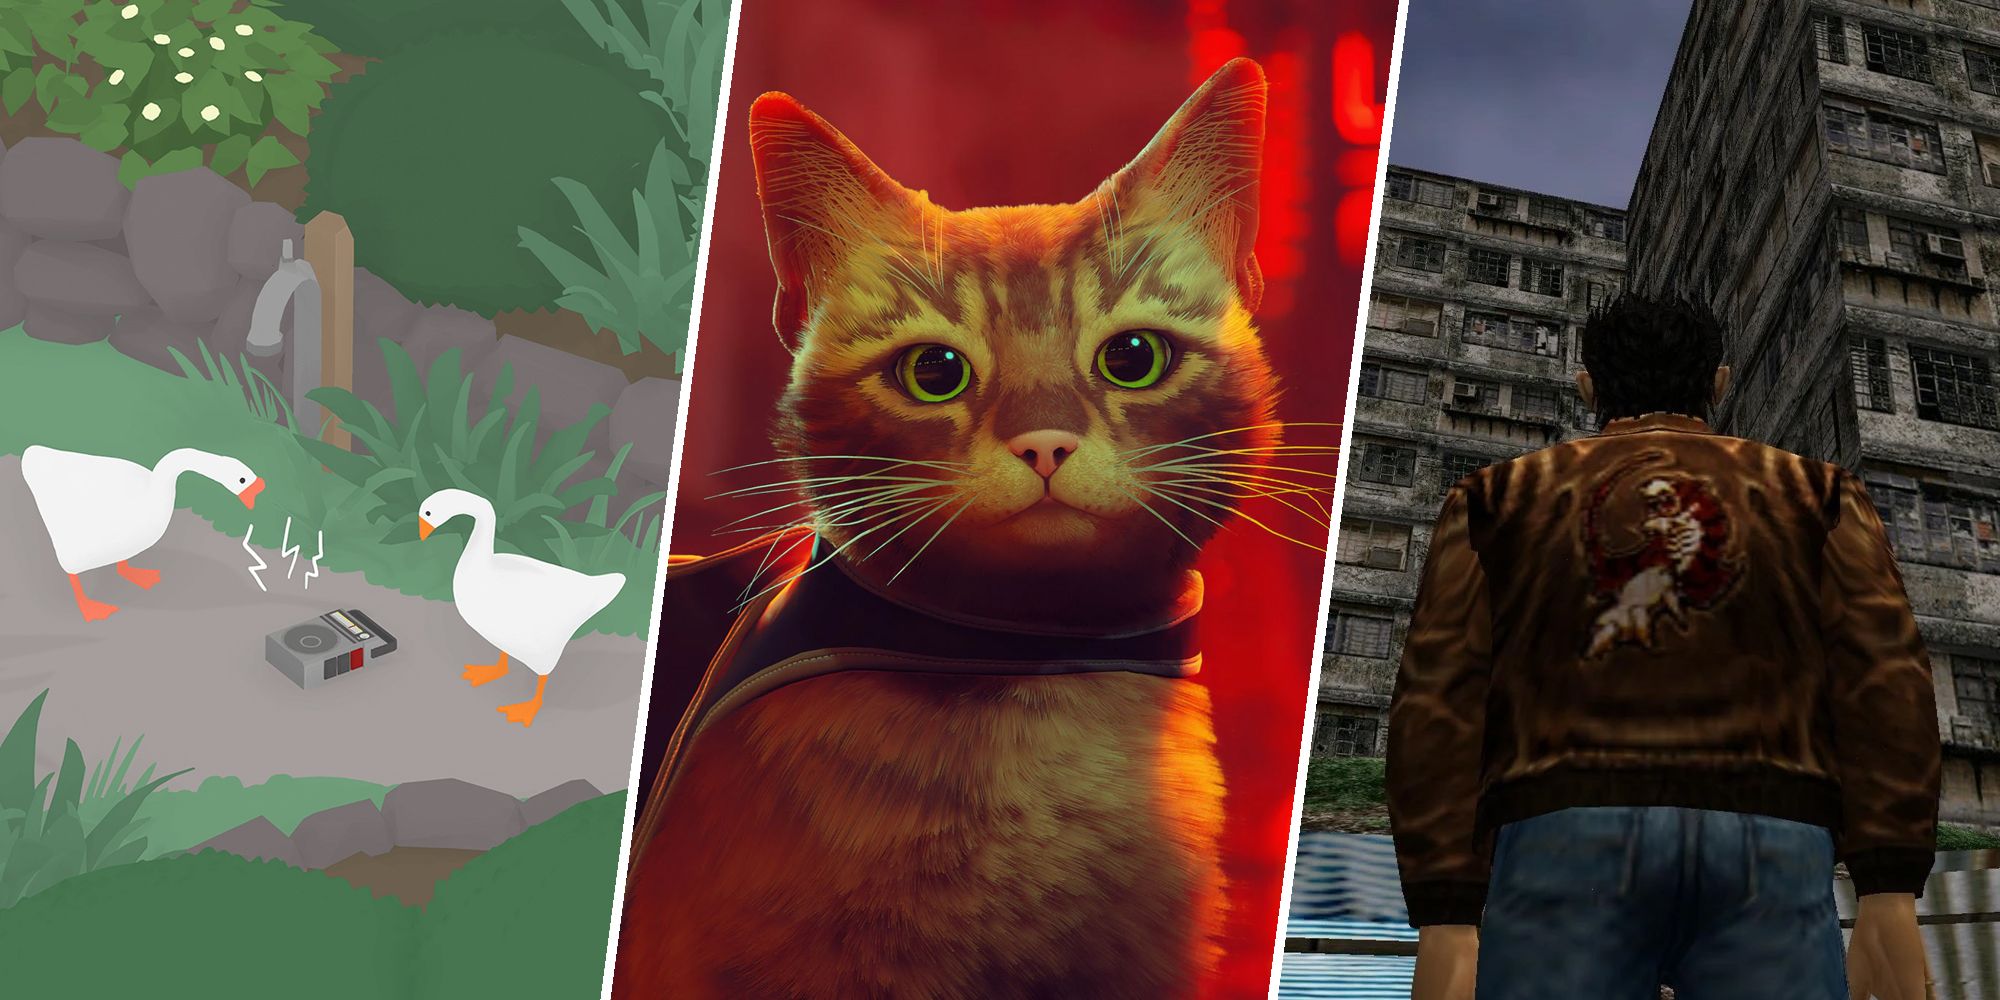 Untitled Goose Game, Stray, and Shenmue